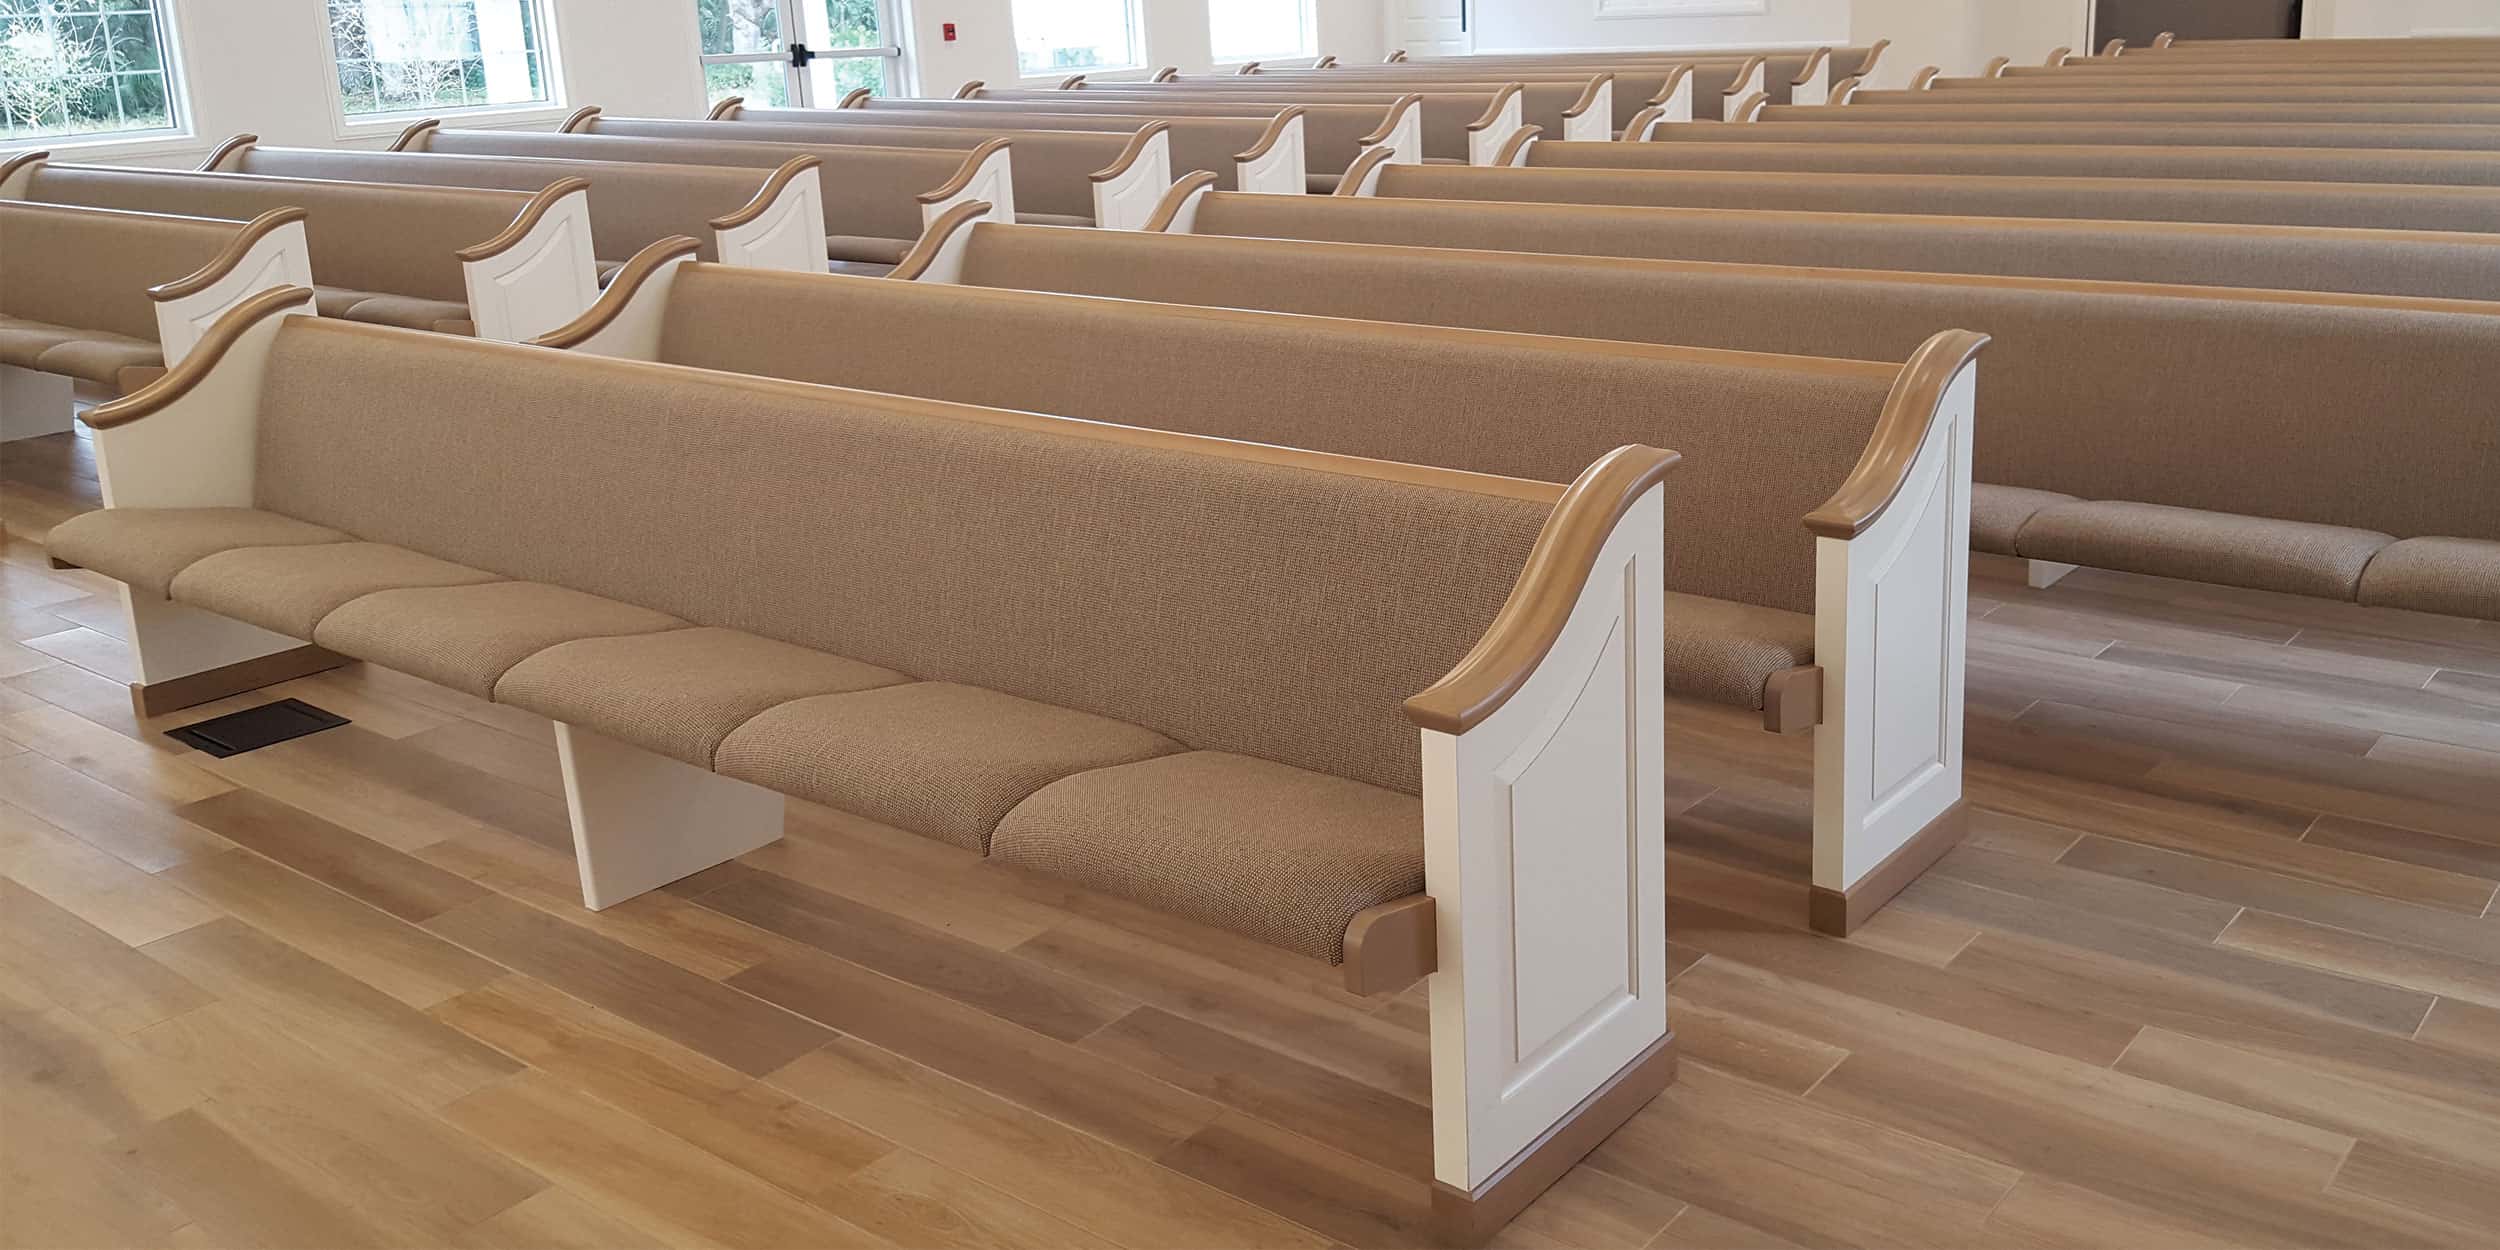 Fully Upholstered Definity Church Pews with Individual Seating from Sauder Worship